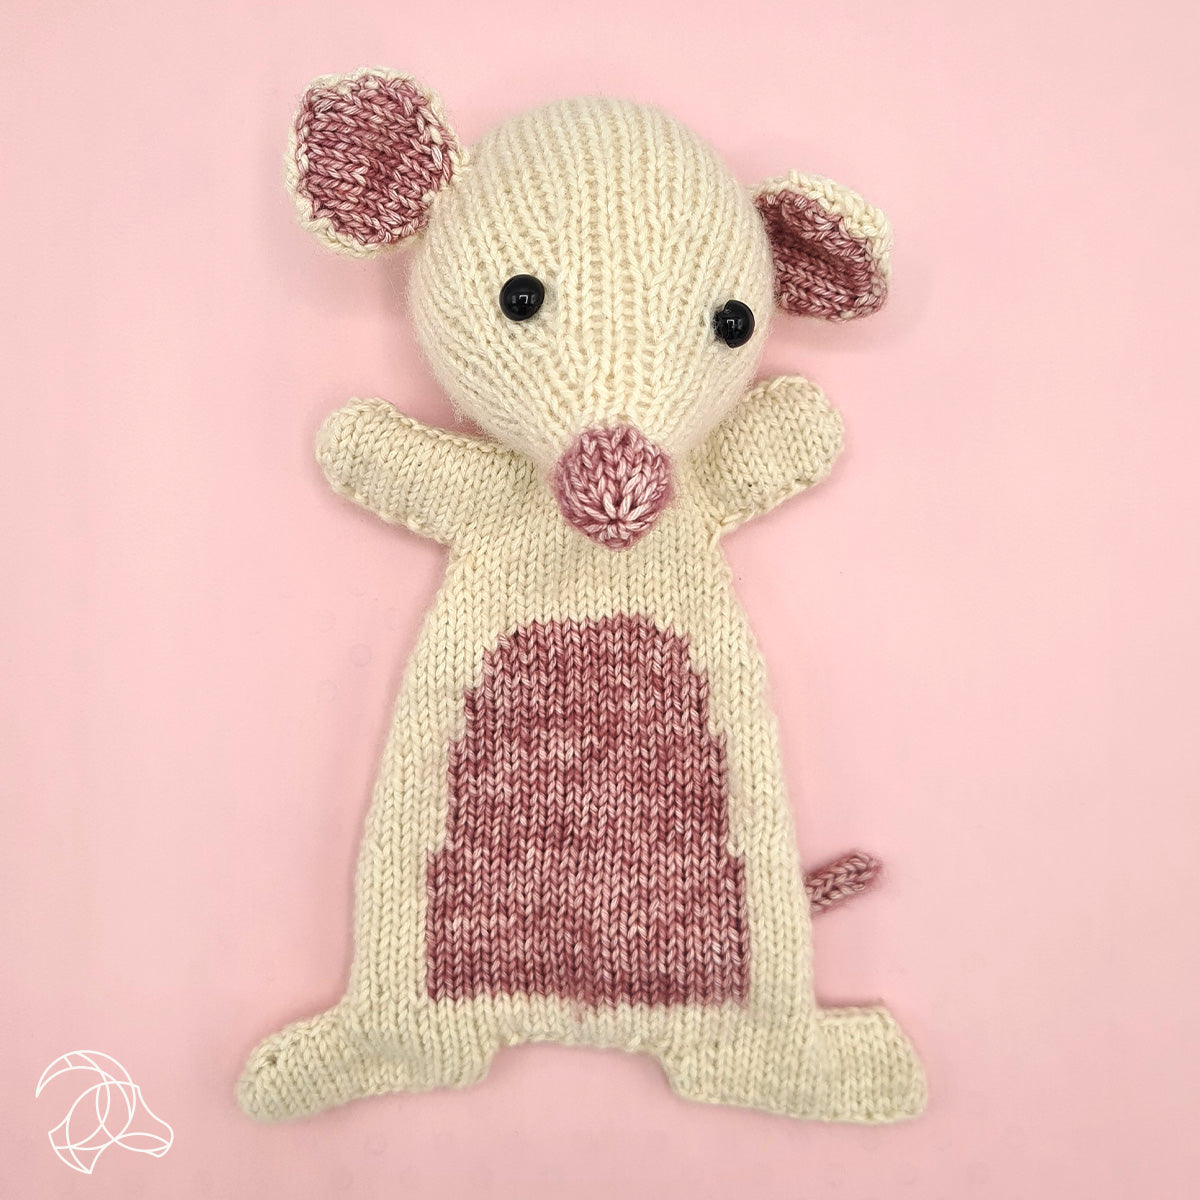 Timmy the Little Mouse - Adorable Knitting Kit from Hardicraft